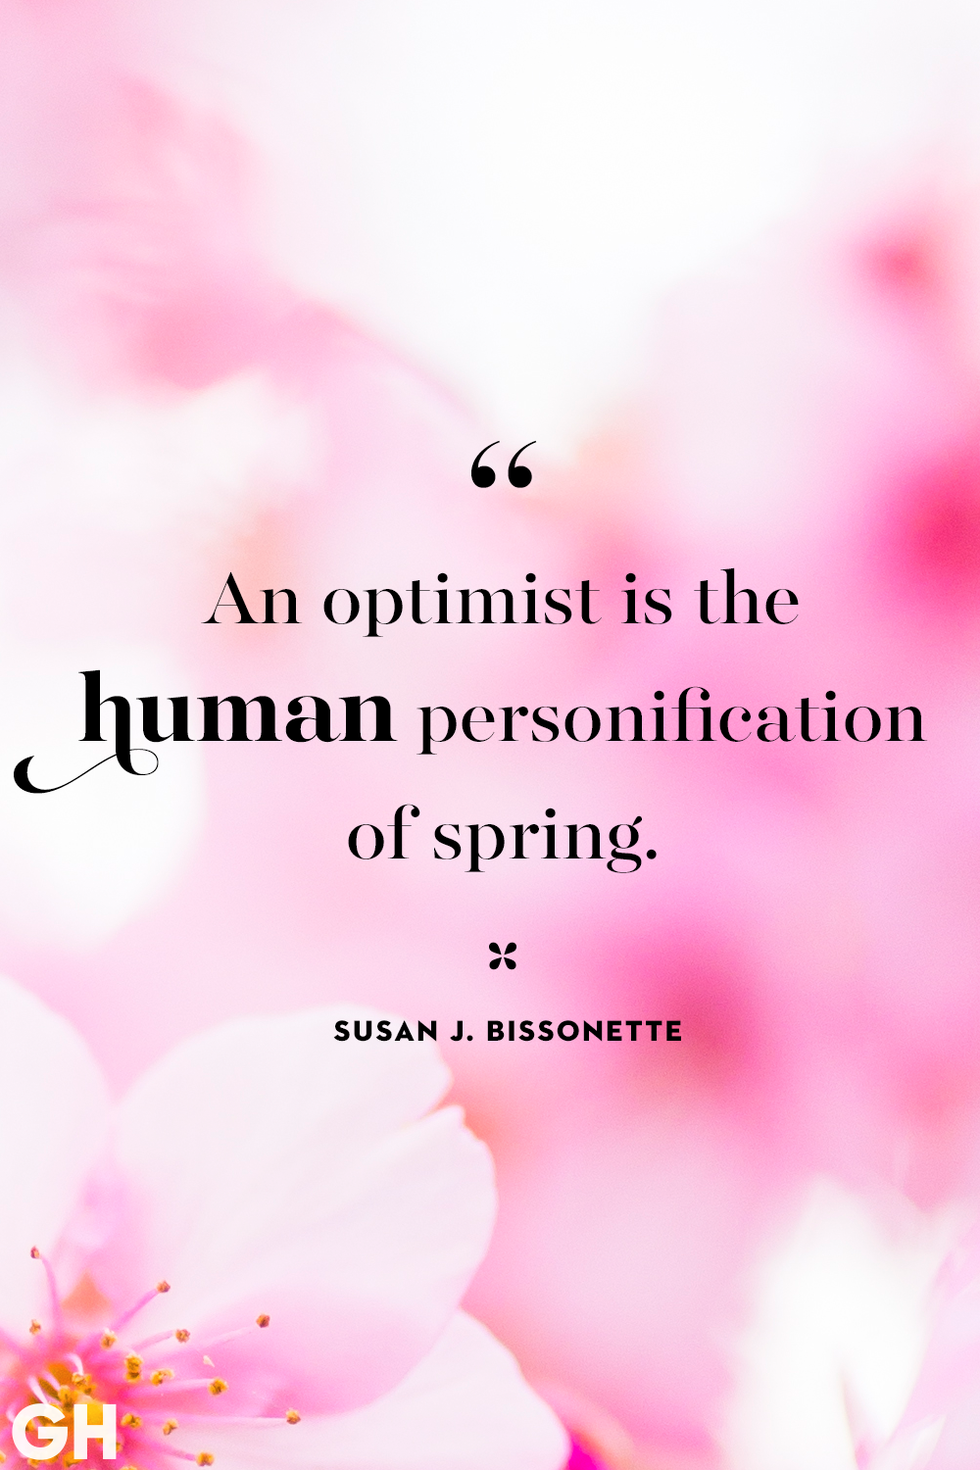 65 Best Spring Quotes for Inspiration, Happiness and Hope